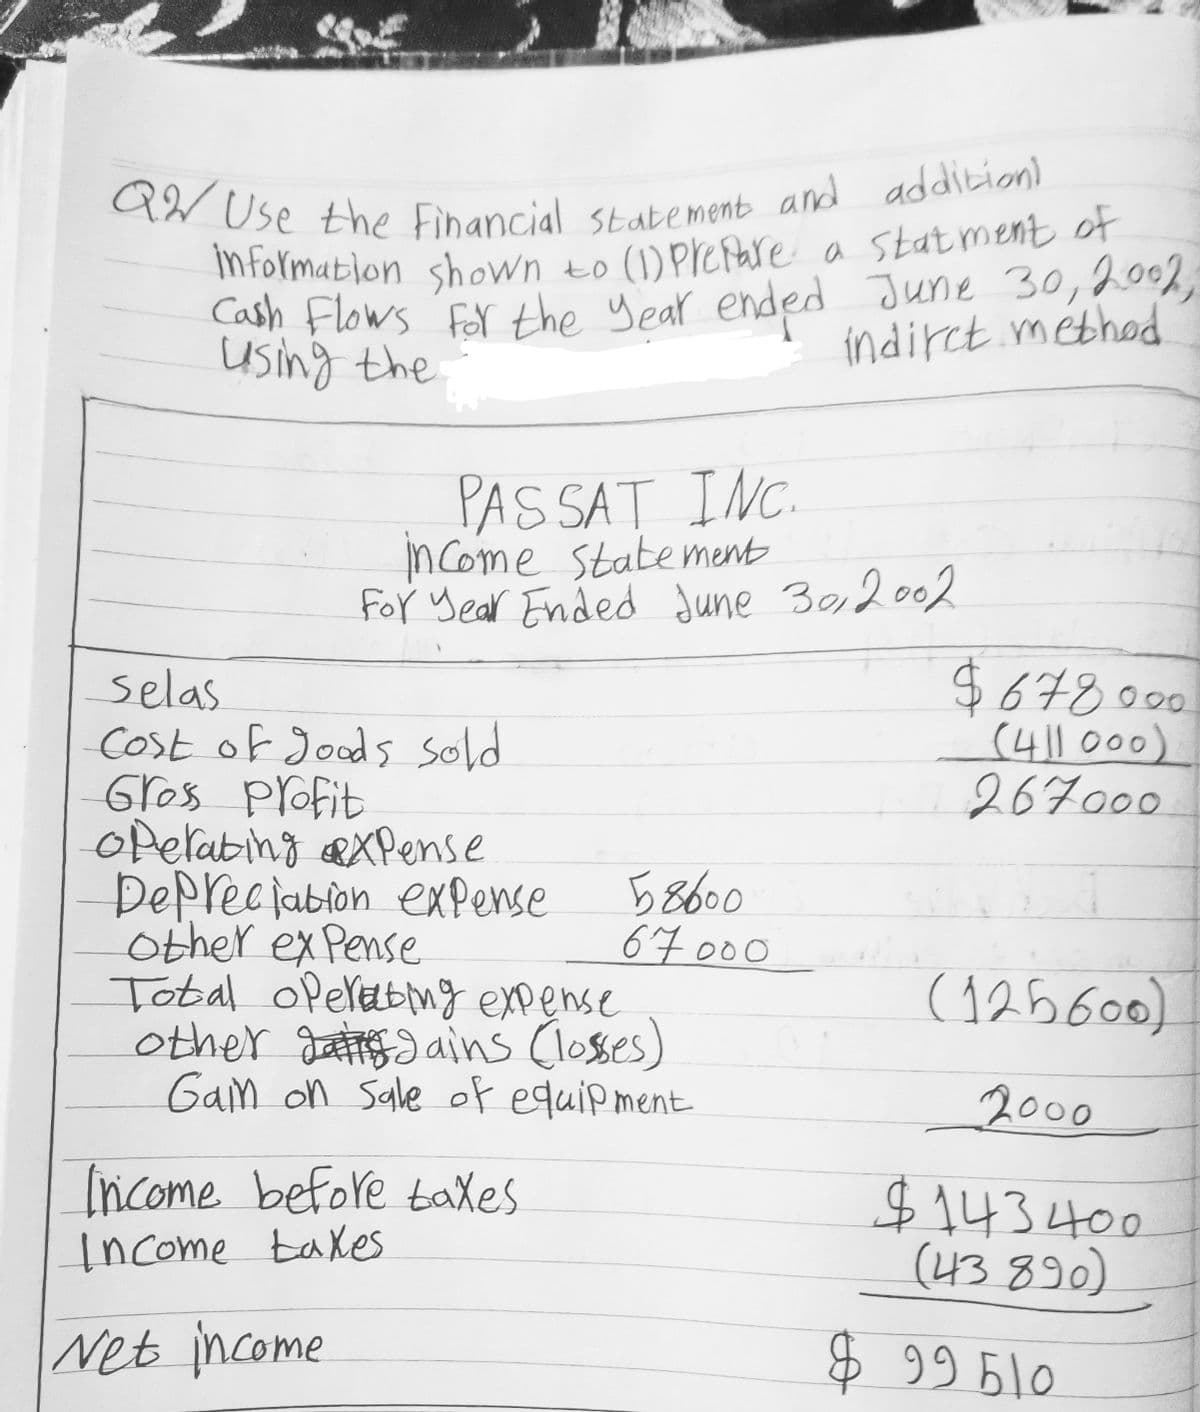 Information shown to (1)Preare a statment of
AW Use the Financial statement and addition)
Information shown to
Cash Flows For the Year ended
Using the
(1) Prefare a statment of
June 30,200%,
indirct.methed
PASSAT INC.
MCome Statement
For Year Ended June 3,2002
$67800
(411000)
267000
selas
Cost of Joods sold
Gross profit
oPelabing &XPense
Depreciabion exPense
other ex Pense
Tobal operabing expense
other Jattesains Closses)
Gain on Sale of equipment
58600
67000
(125600)
200
Income before taes
$143400
(43890)
Income taXes
Net income
$99510
